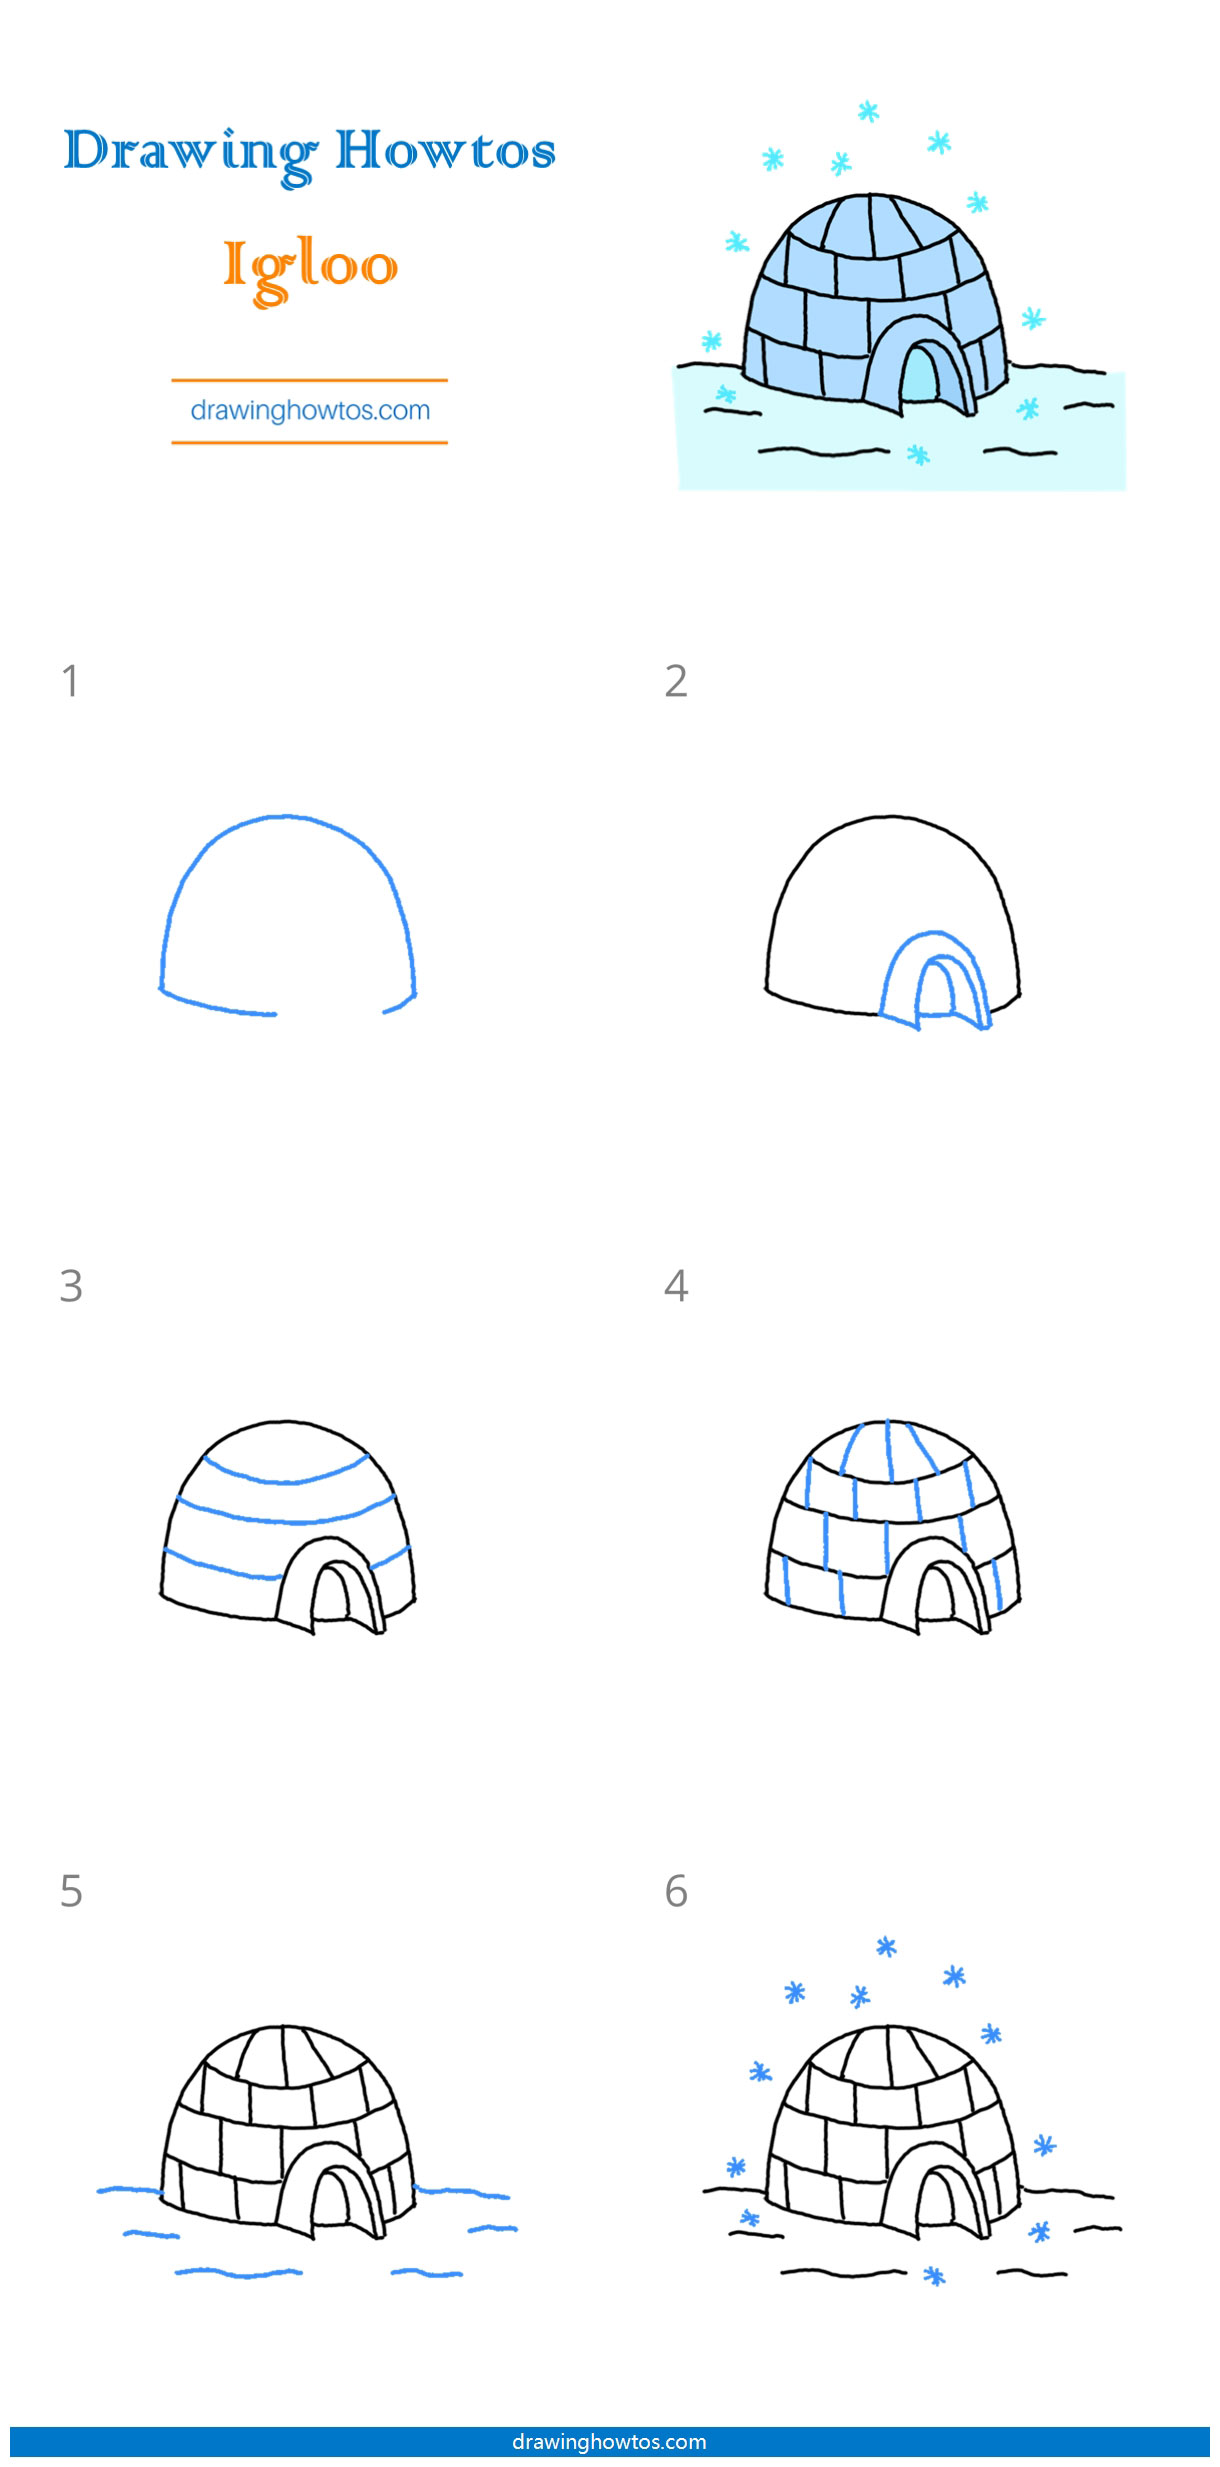 How to Draw an Igloo Step by Step